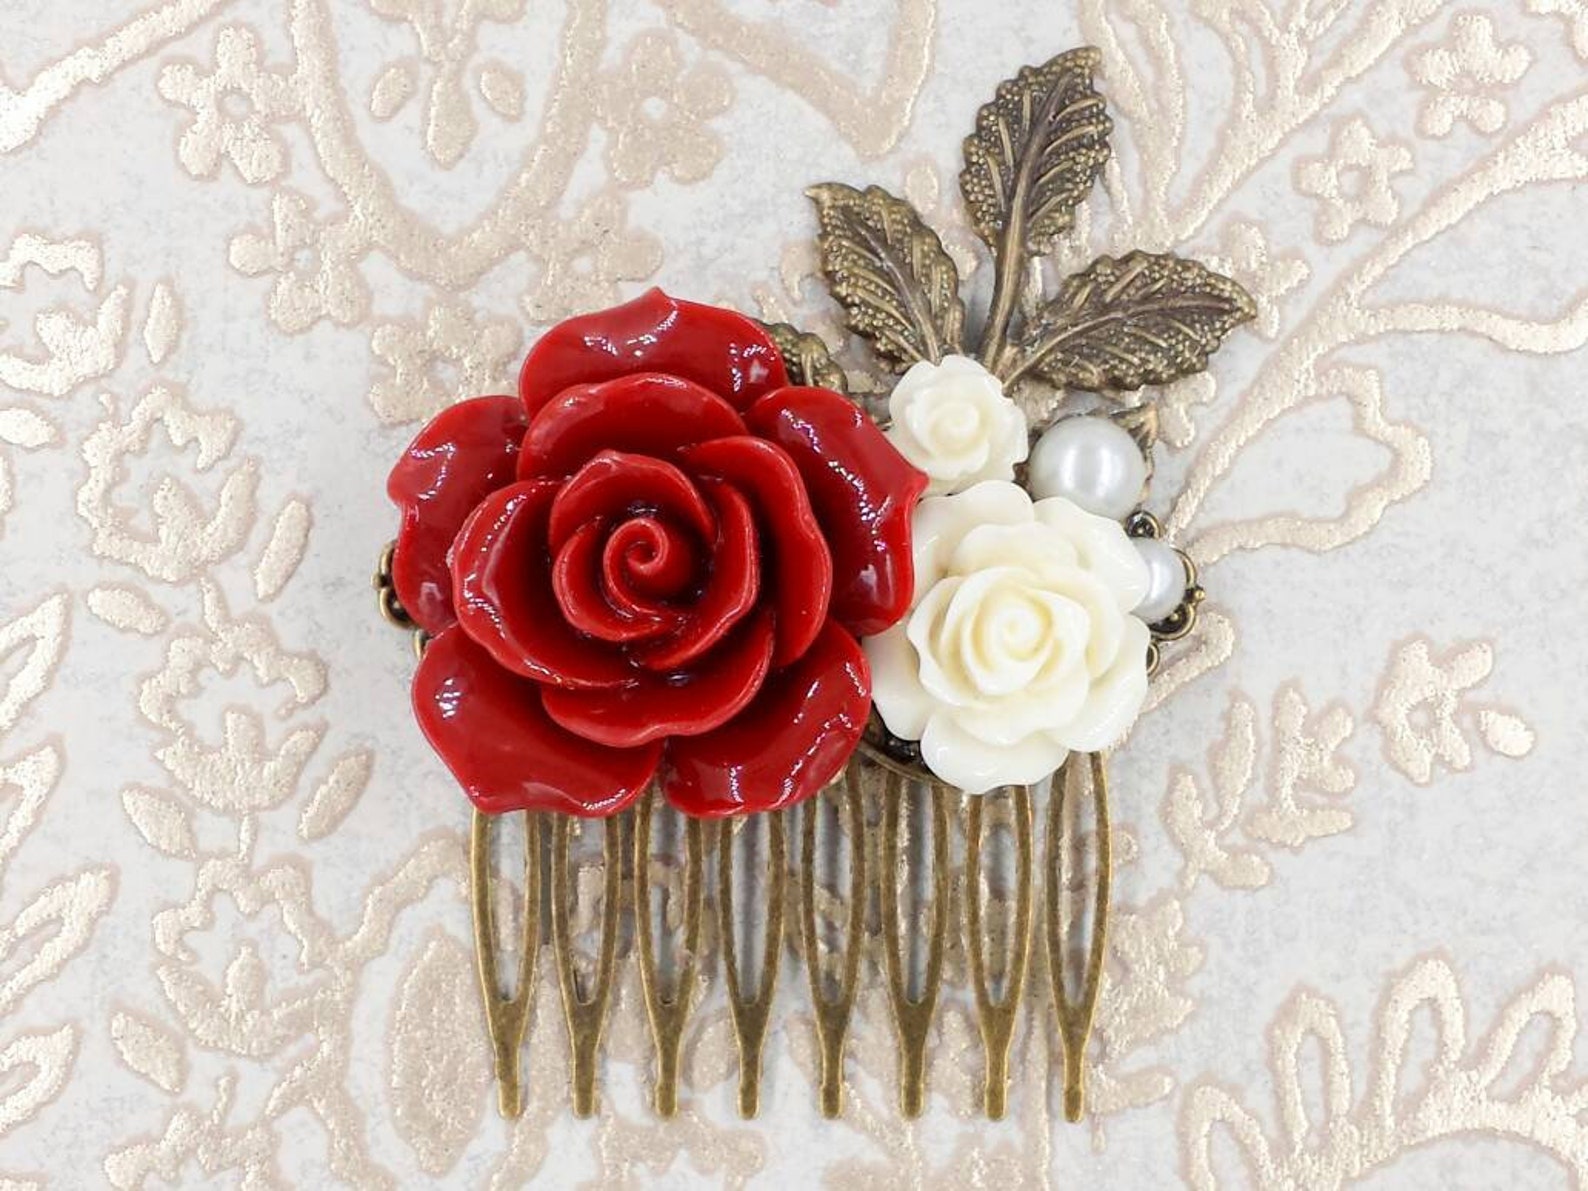 Red Rose Comb Red and White Floral Hair Comb Red Flower | Etsy